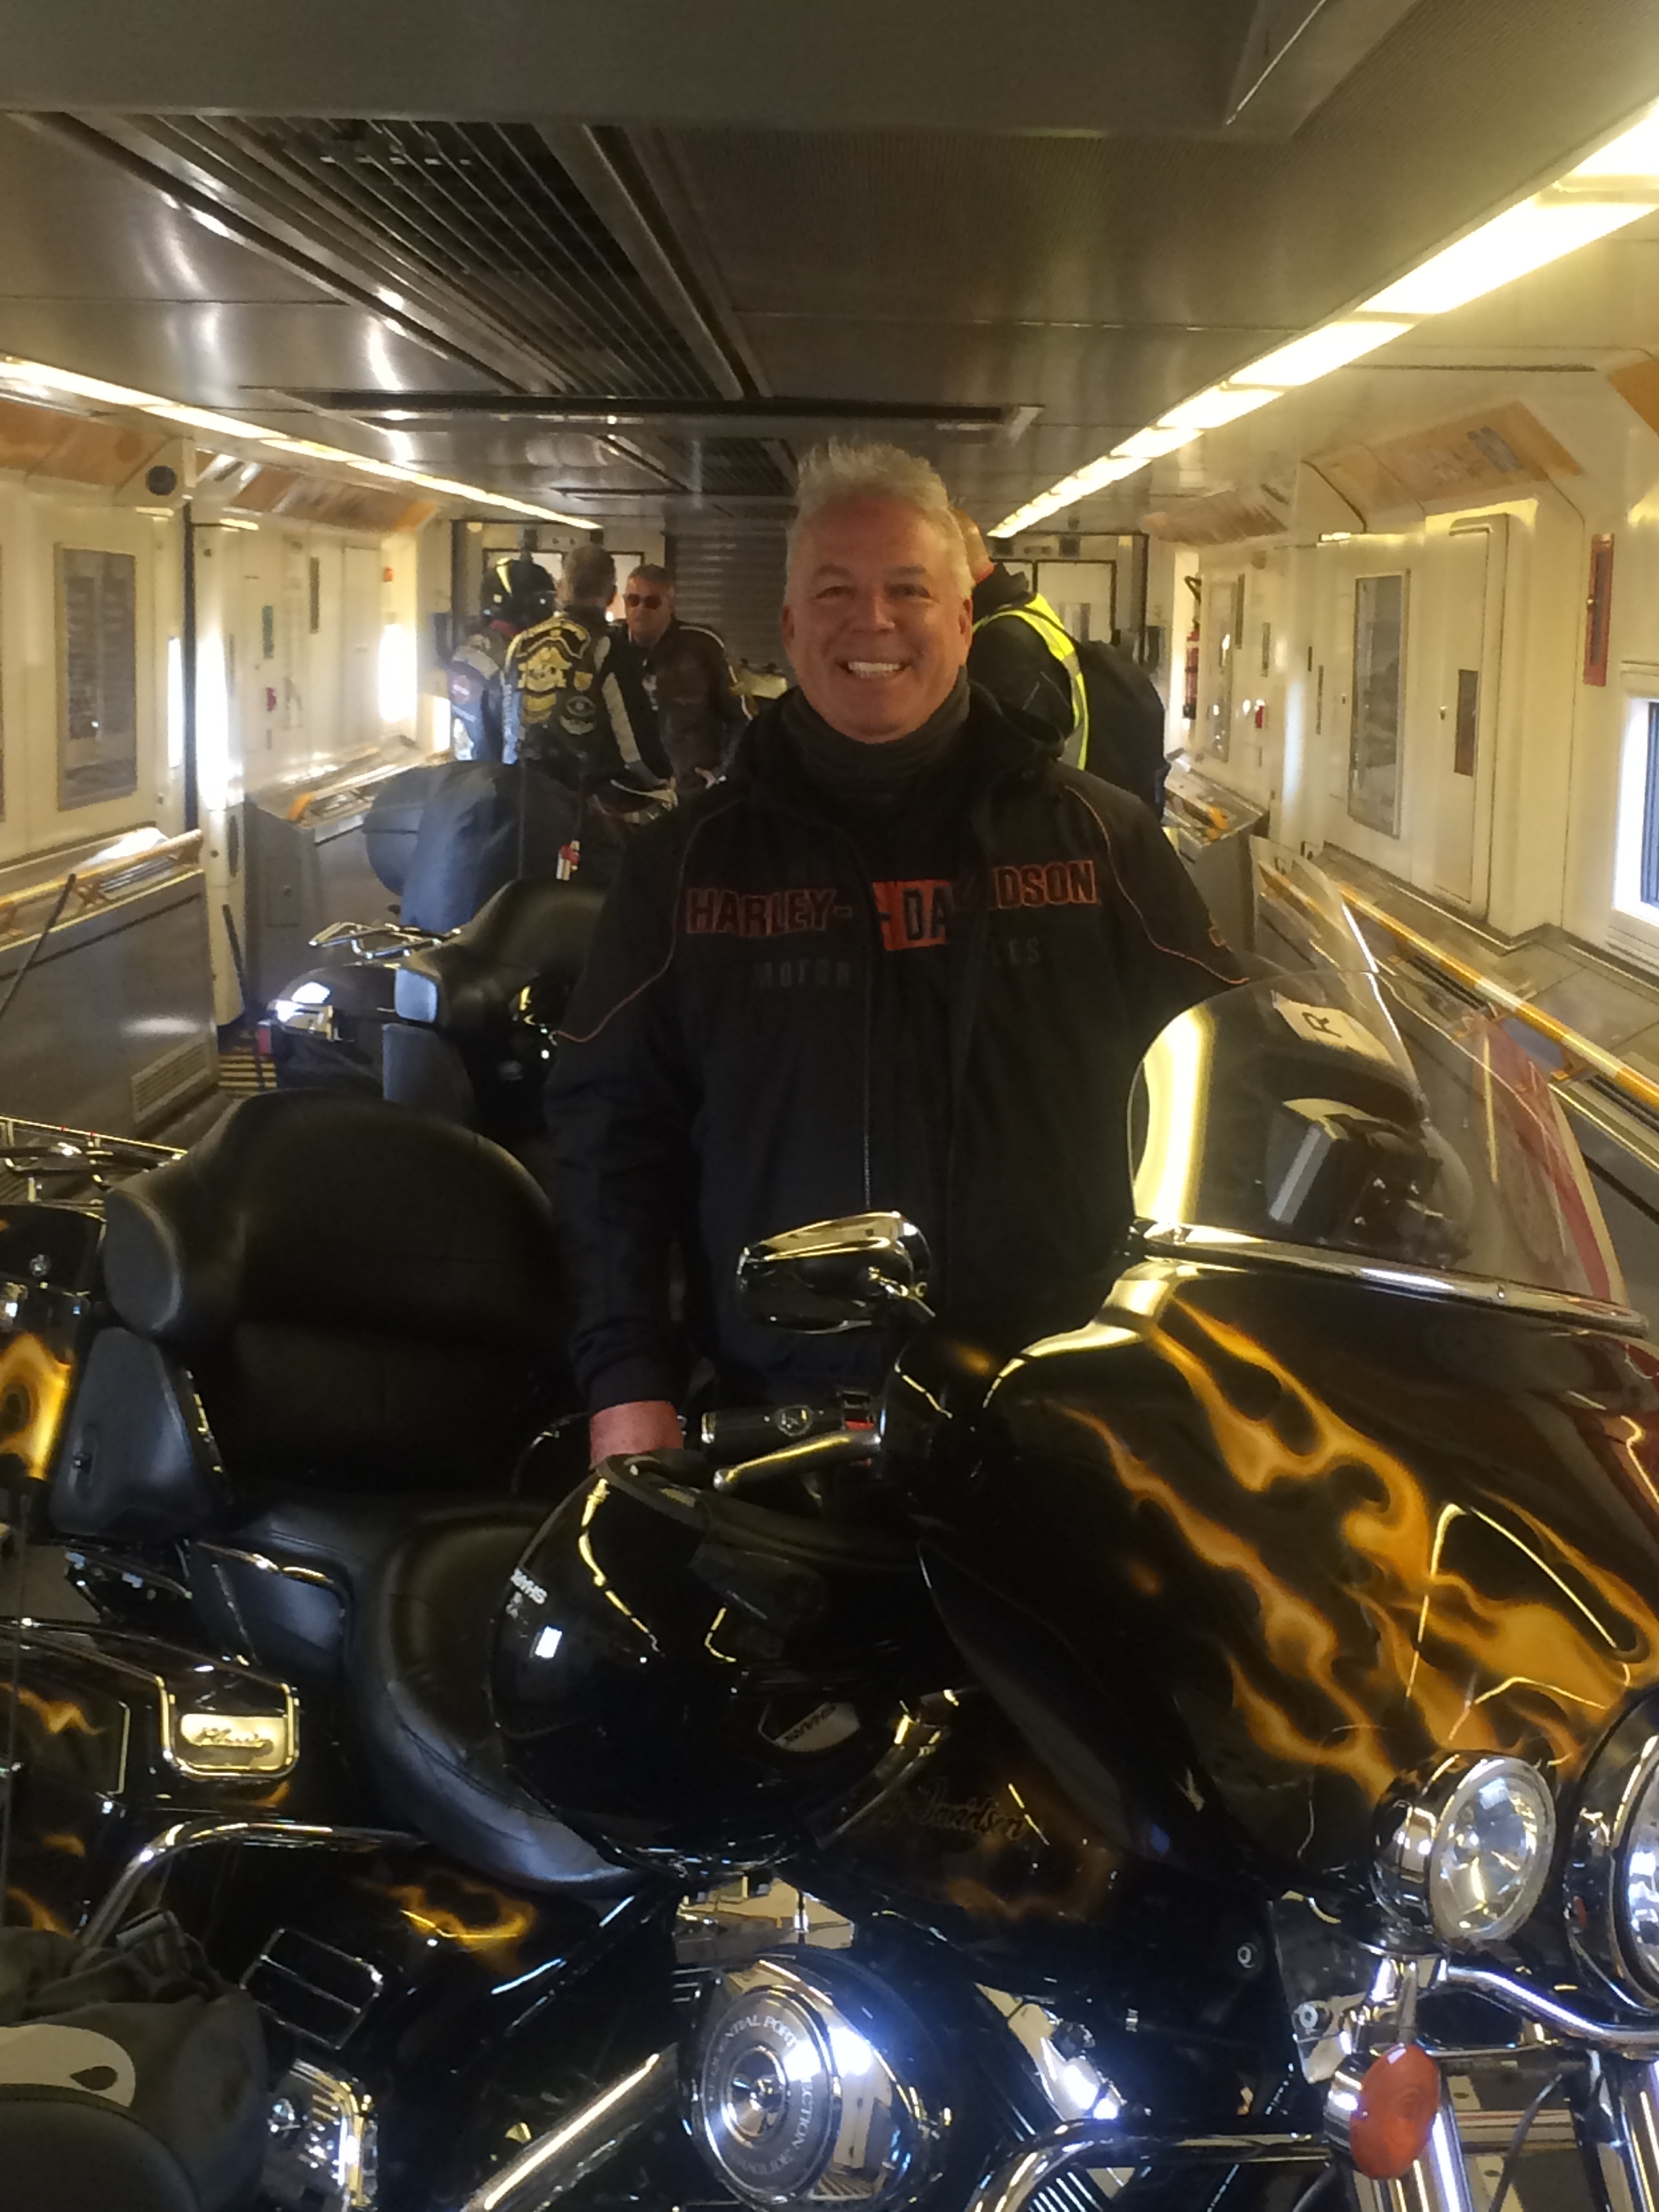 Tunnel ride to France - all Harleys